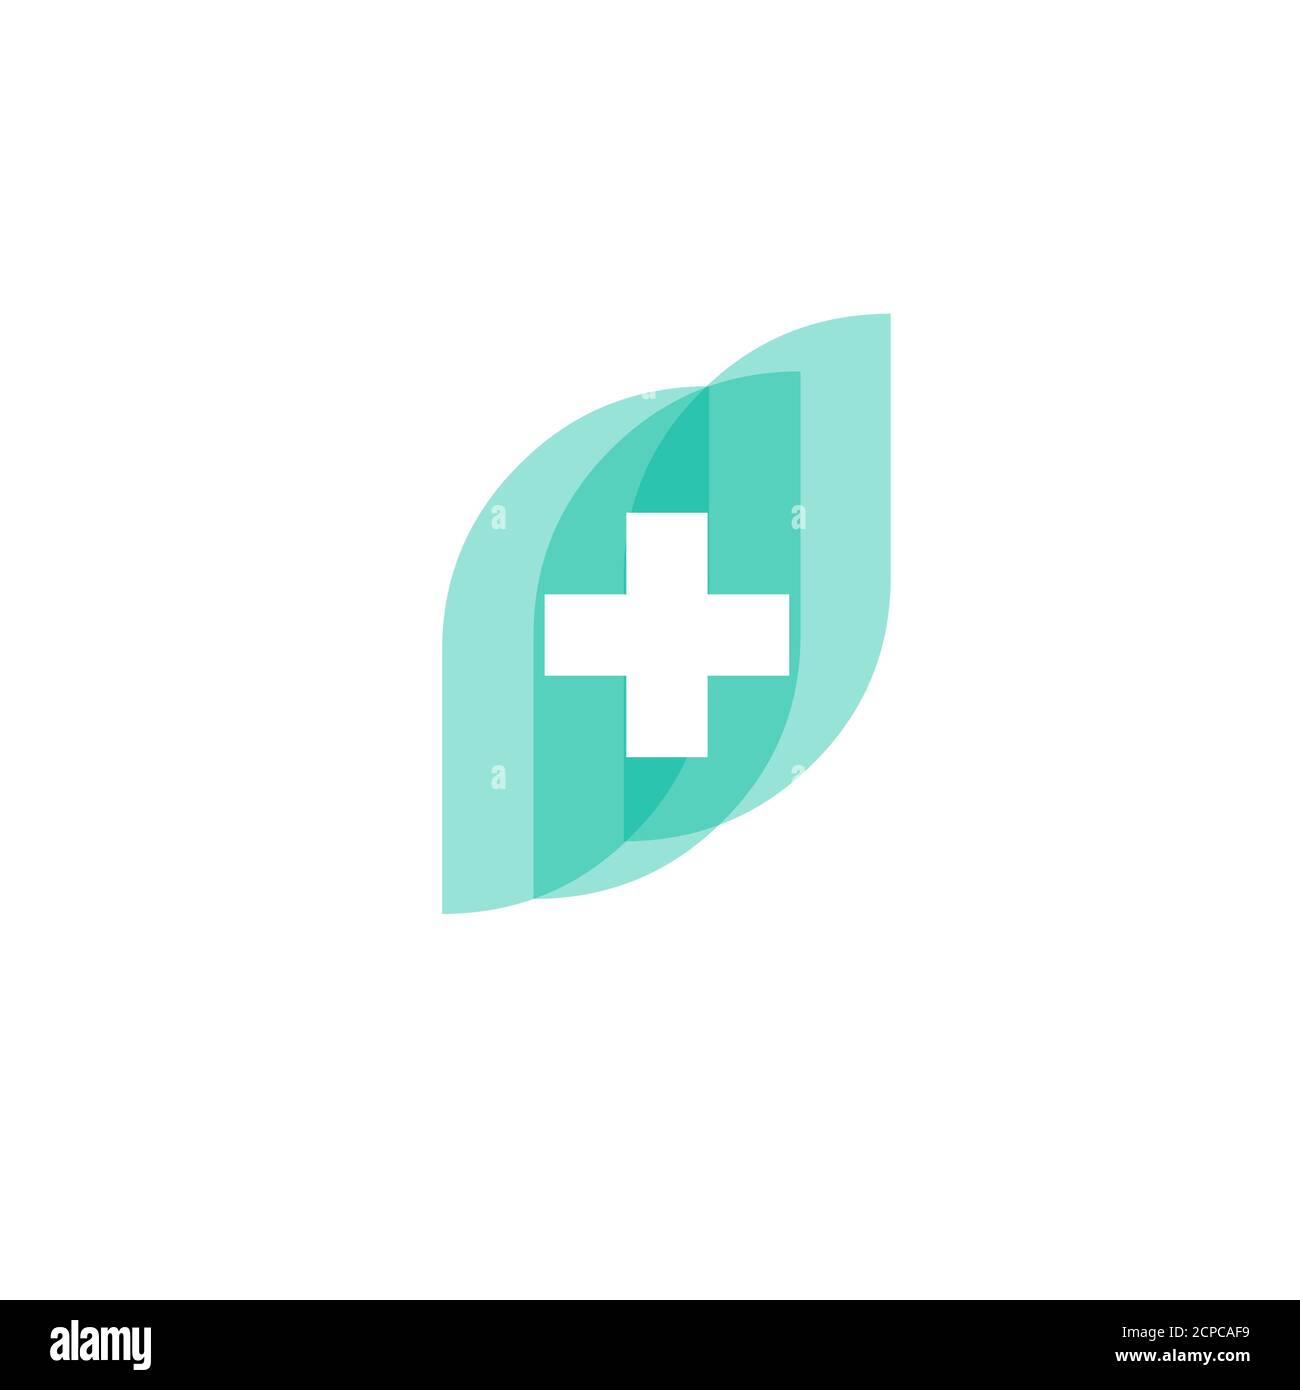 Doctor plus illustration vector logo design for medical and health care symbols. Stock Vector